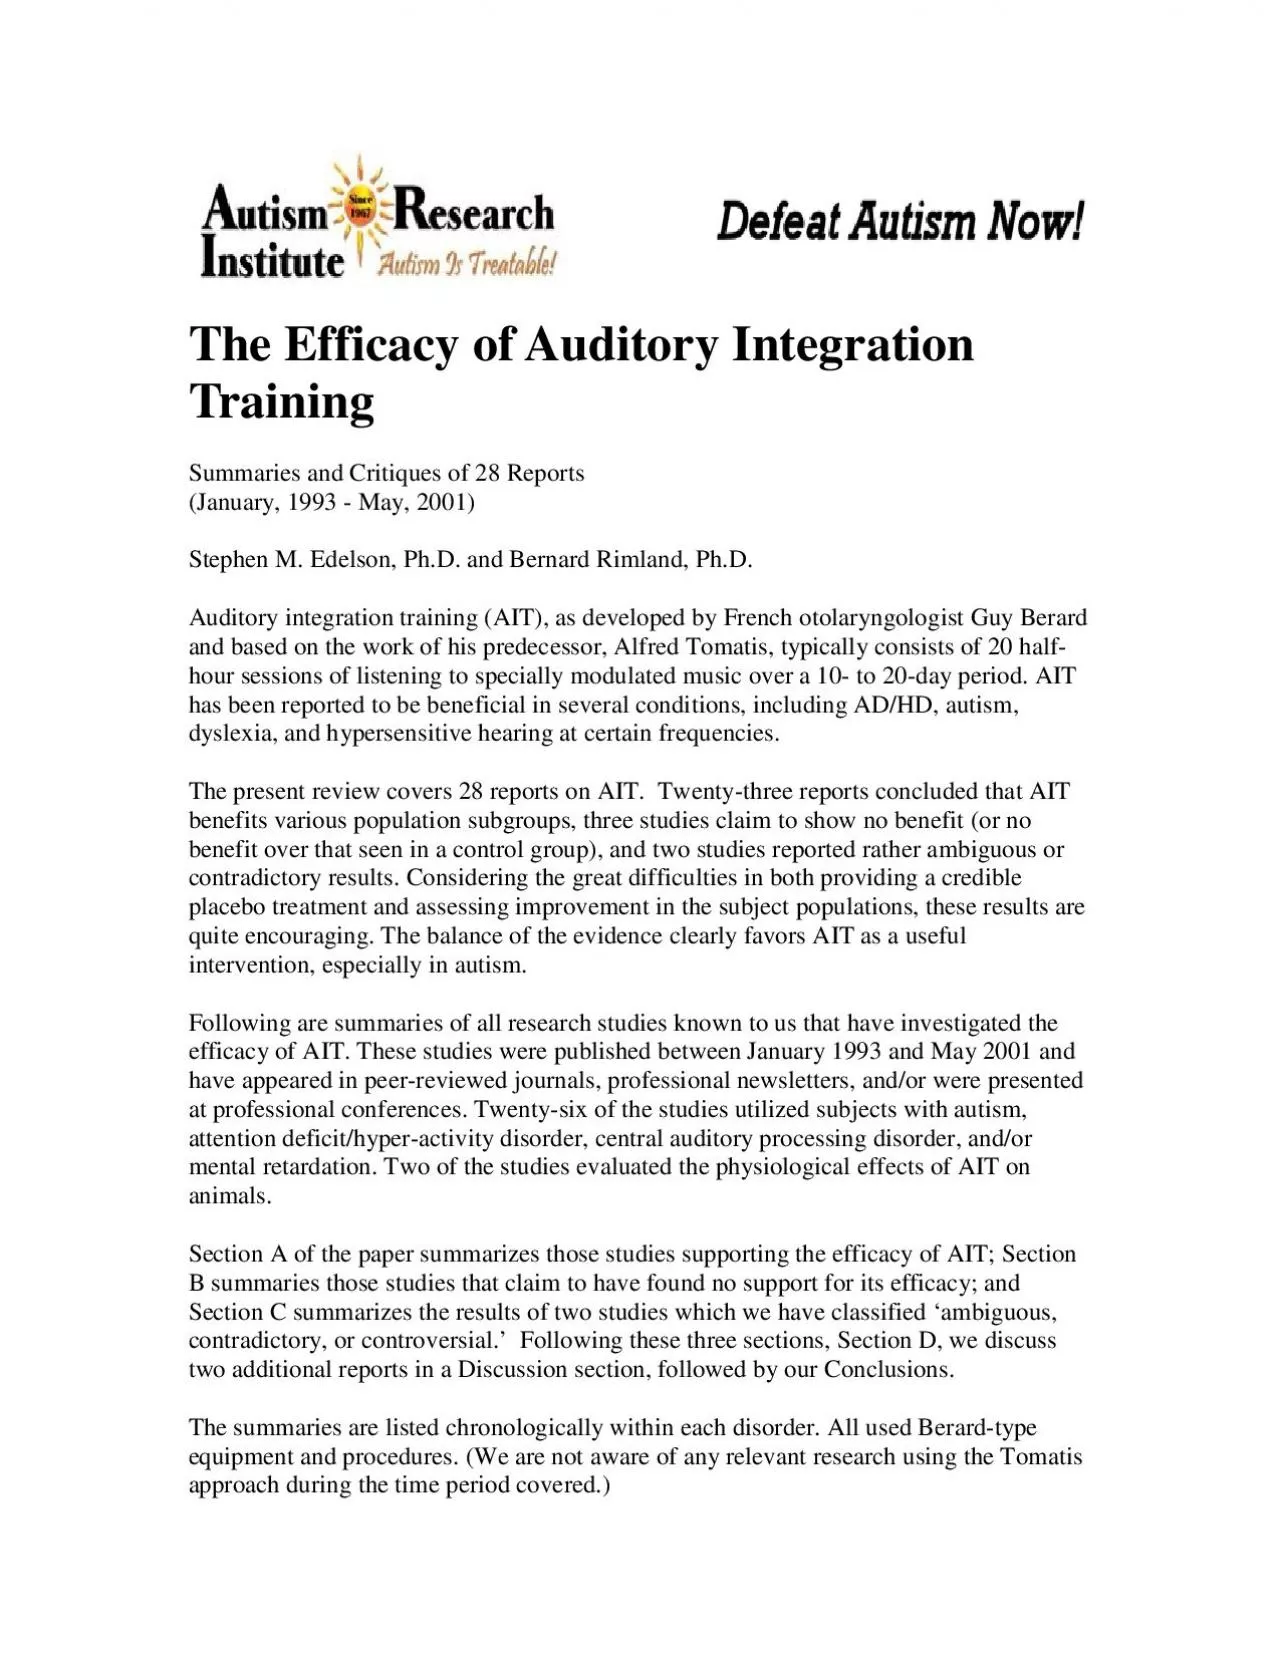 The Efficacy of Auditory Integration TrainingSummaries and Critiques o